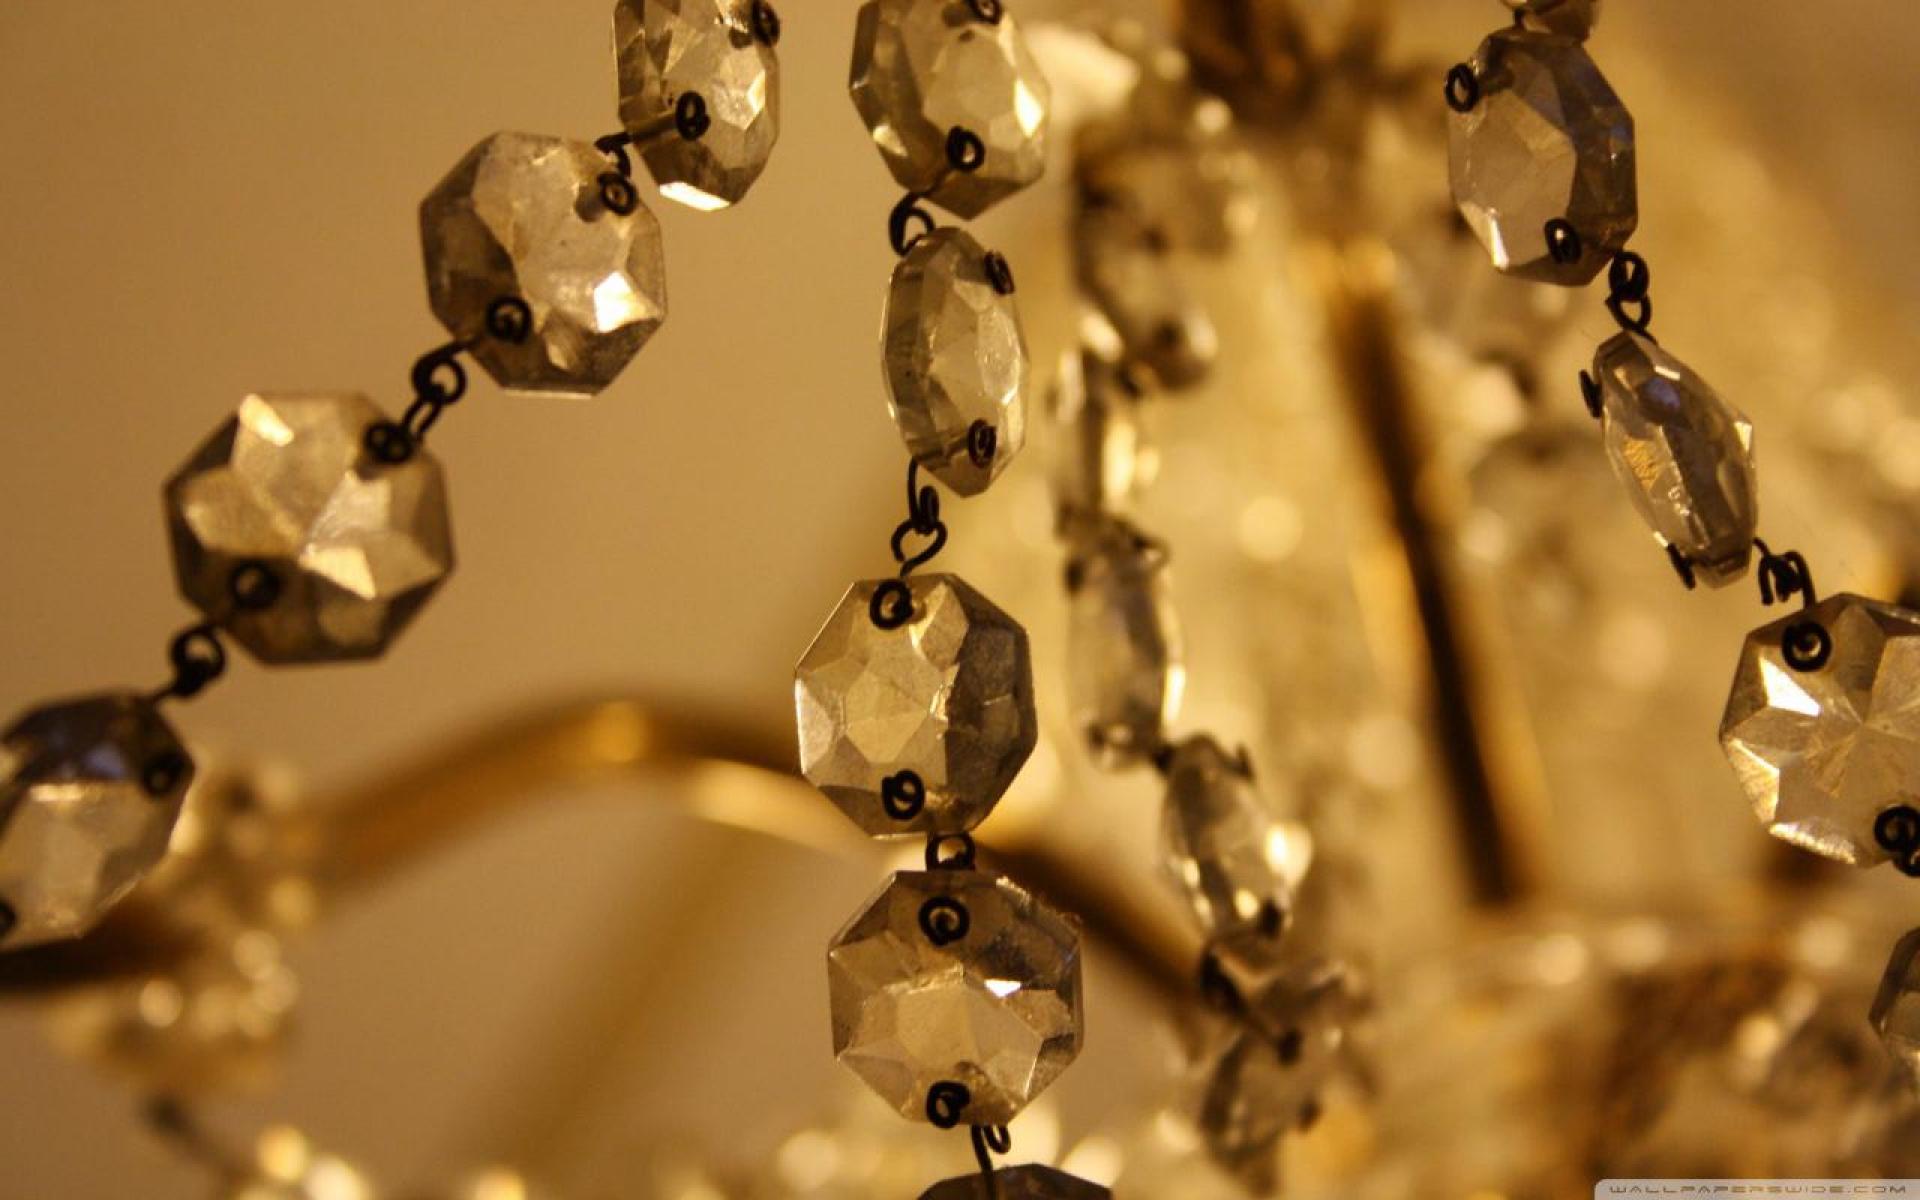 Crystal chandelier - High Quality and Resolution